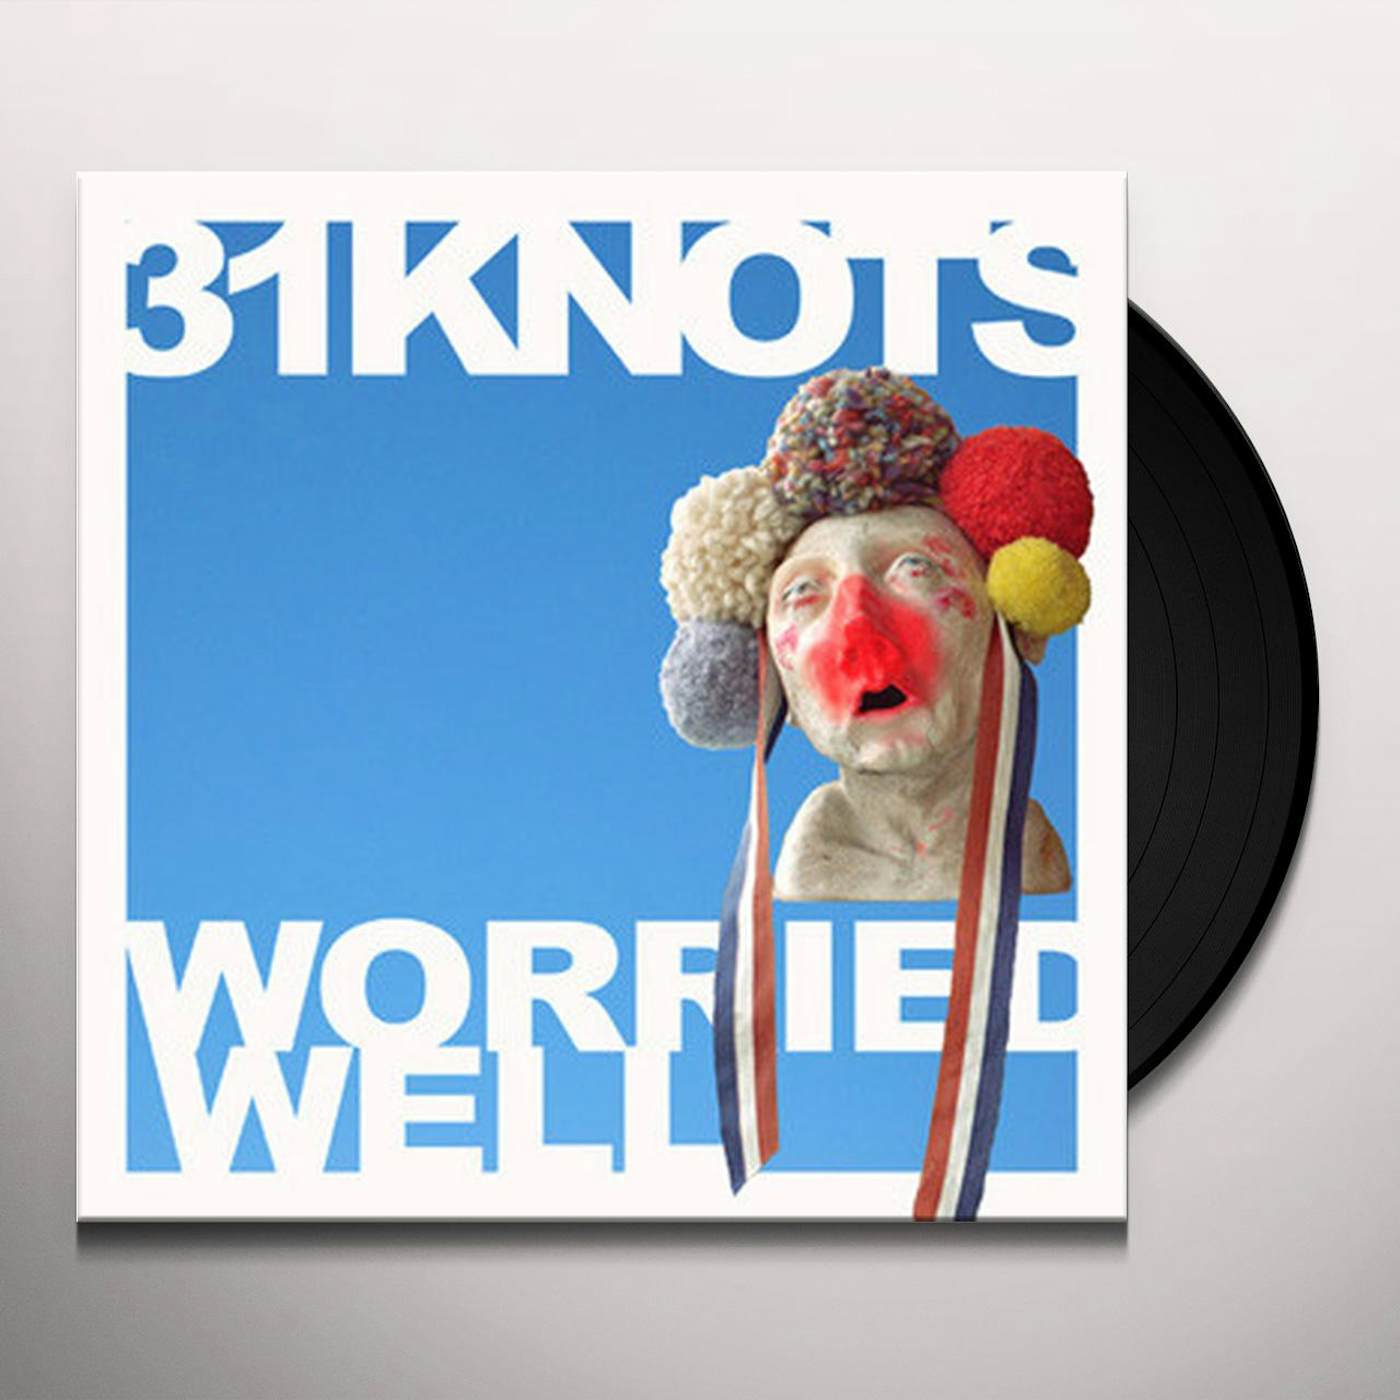 31 Knots Worried Well Vinyl Record